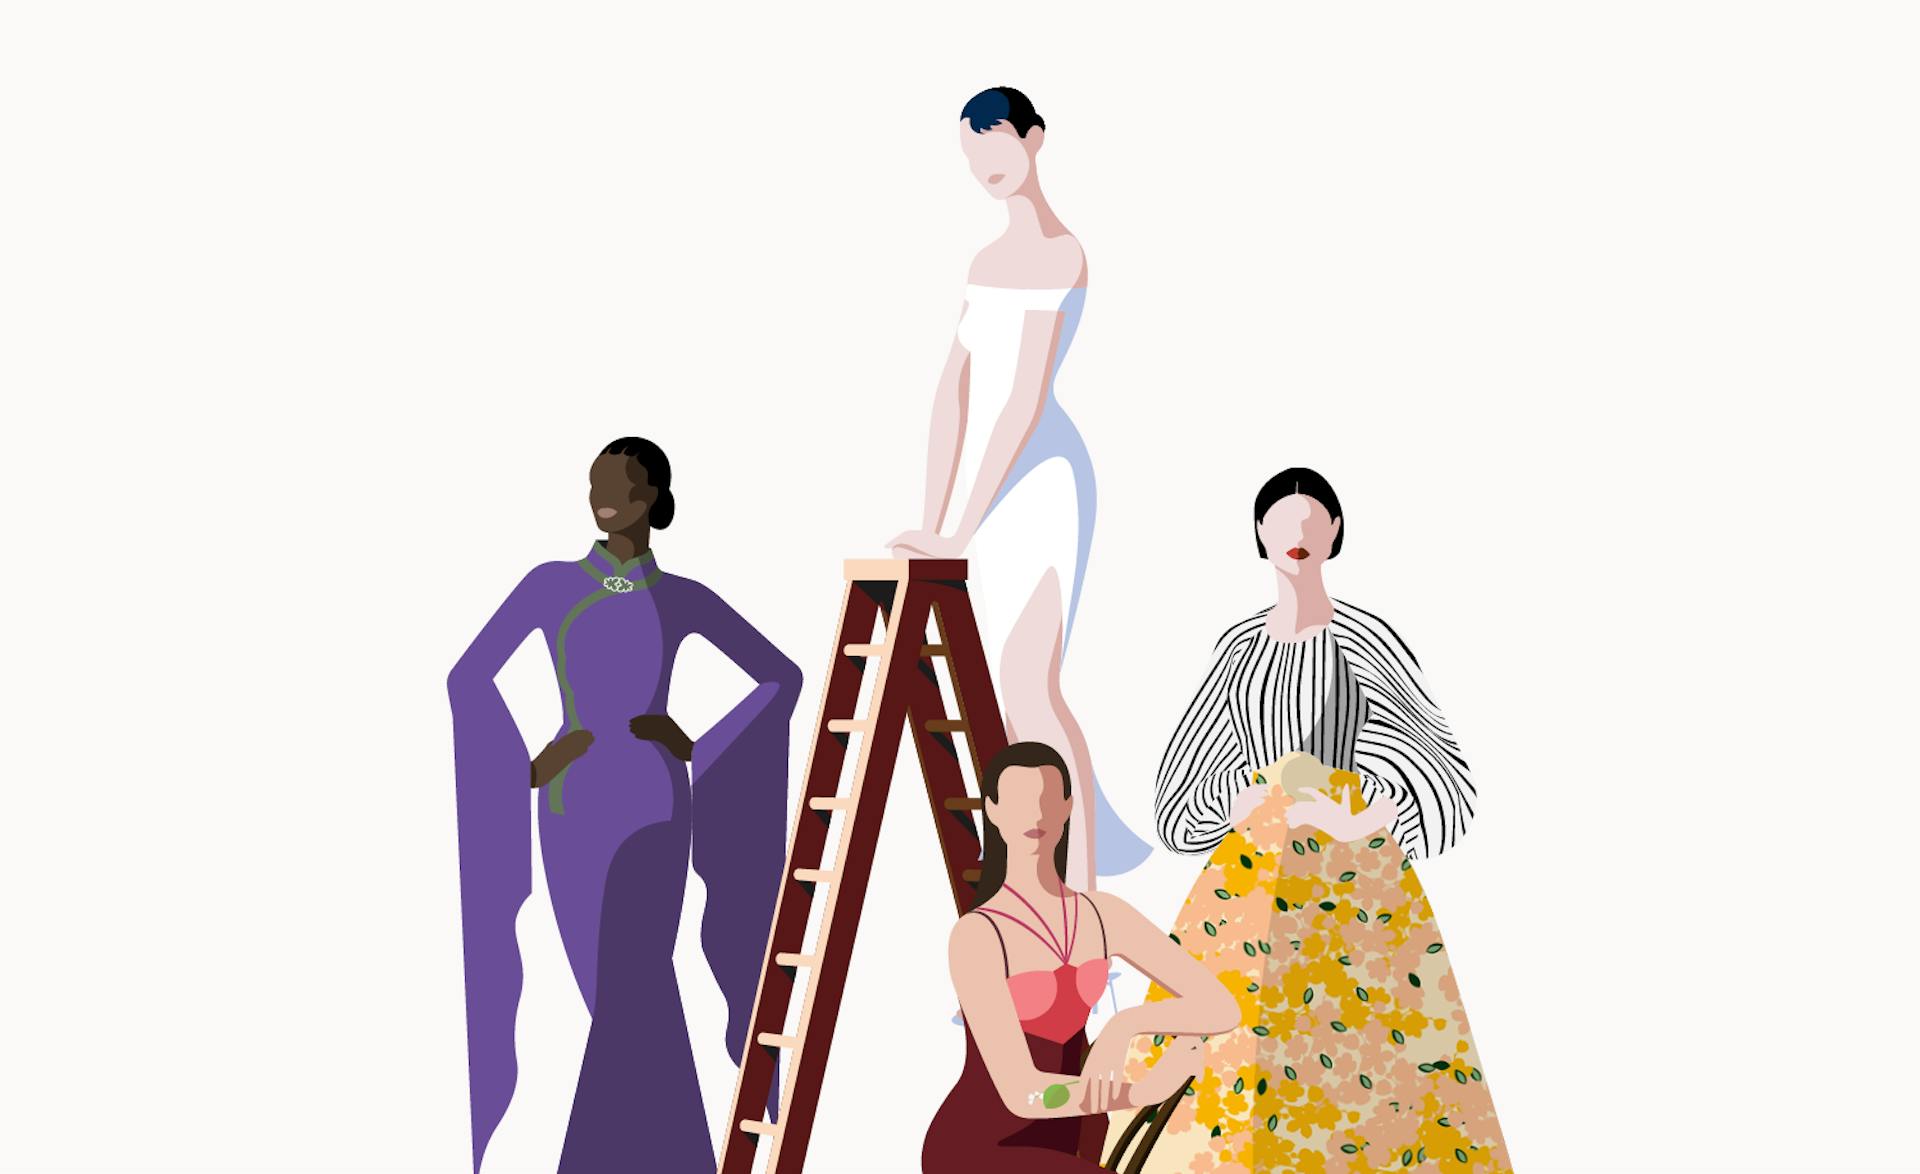 An illustration of a group of women against a white background. 